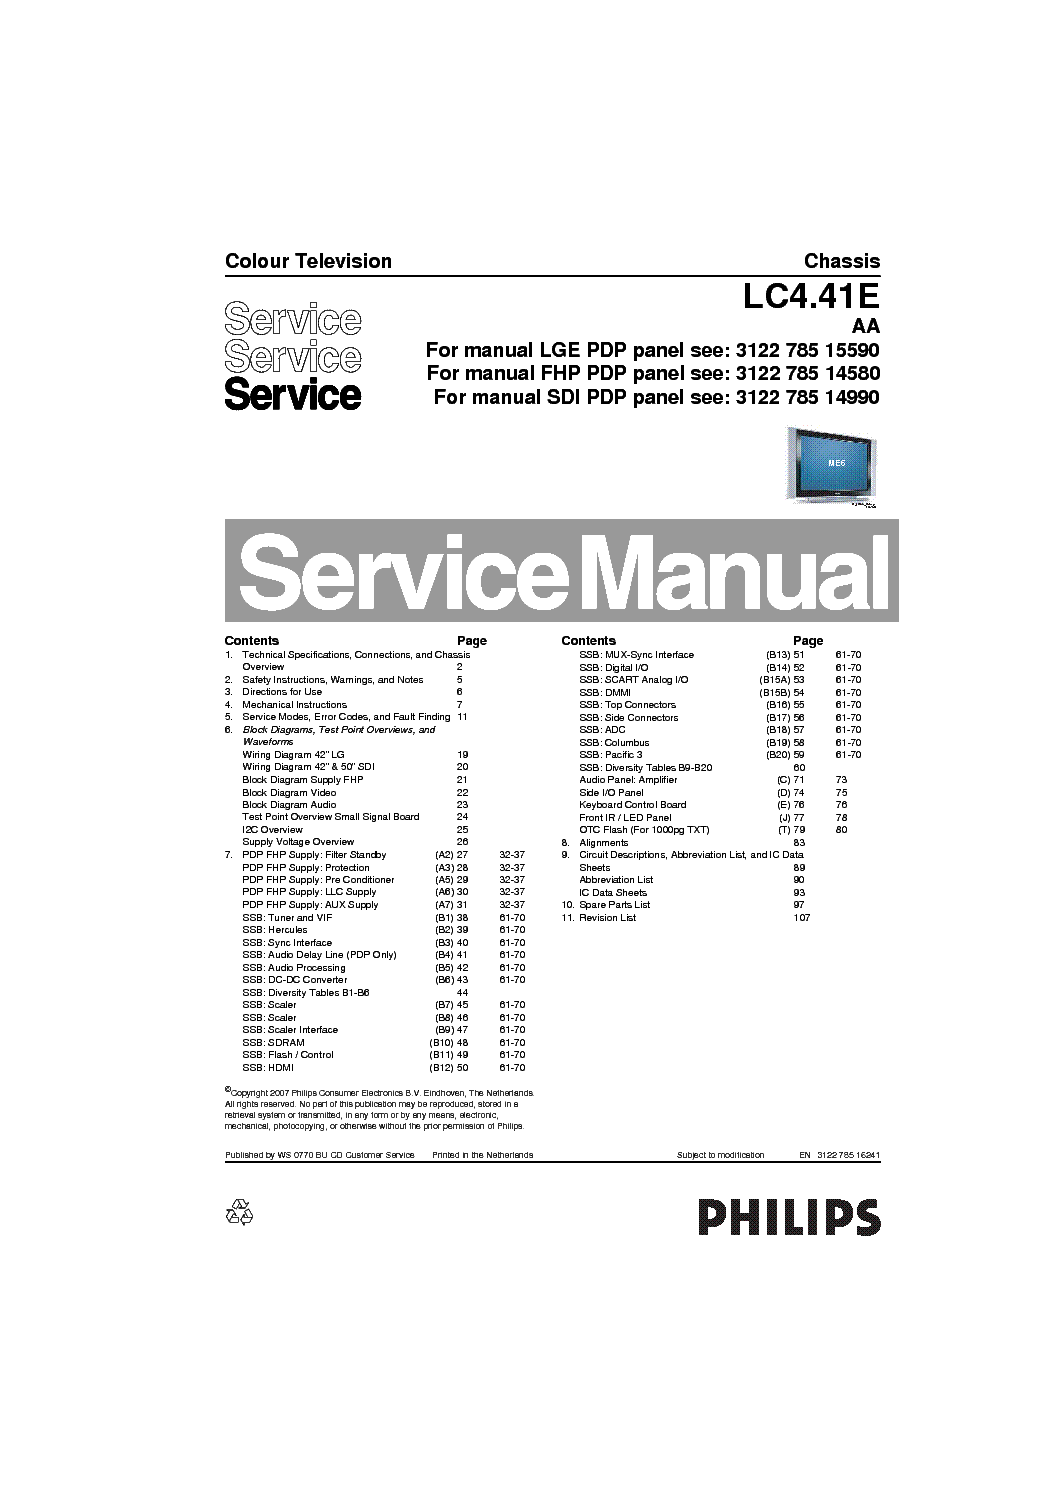 PHILIPS LC4.41E-AA CHASSIS SM service manual (1st page)